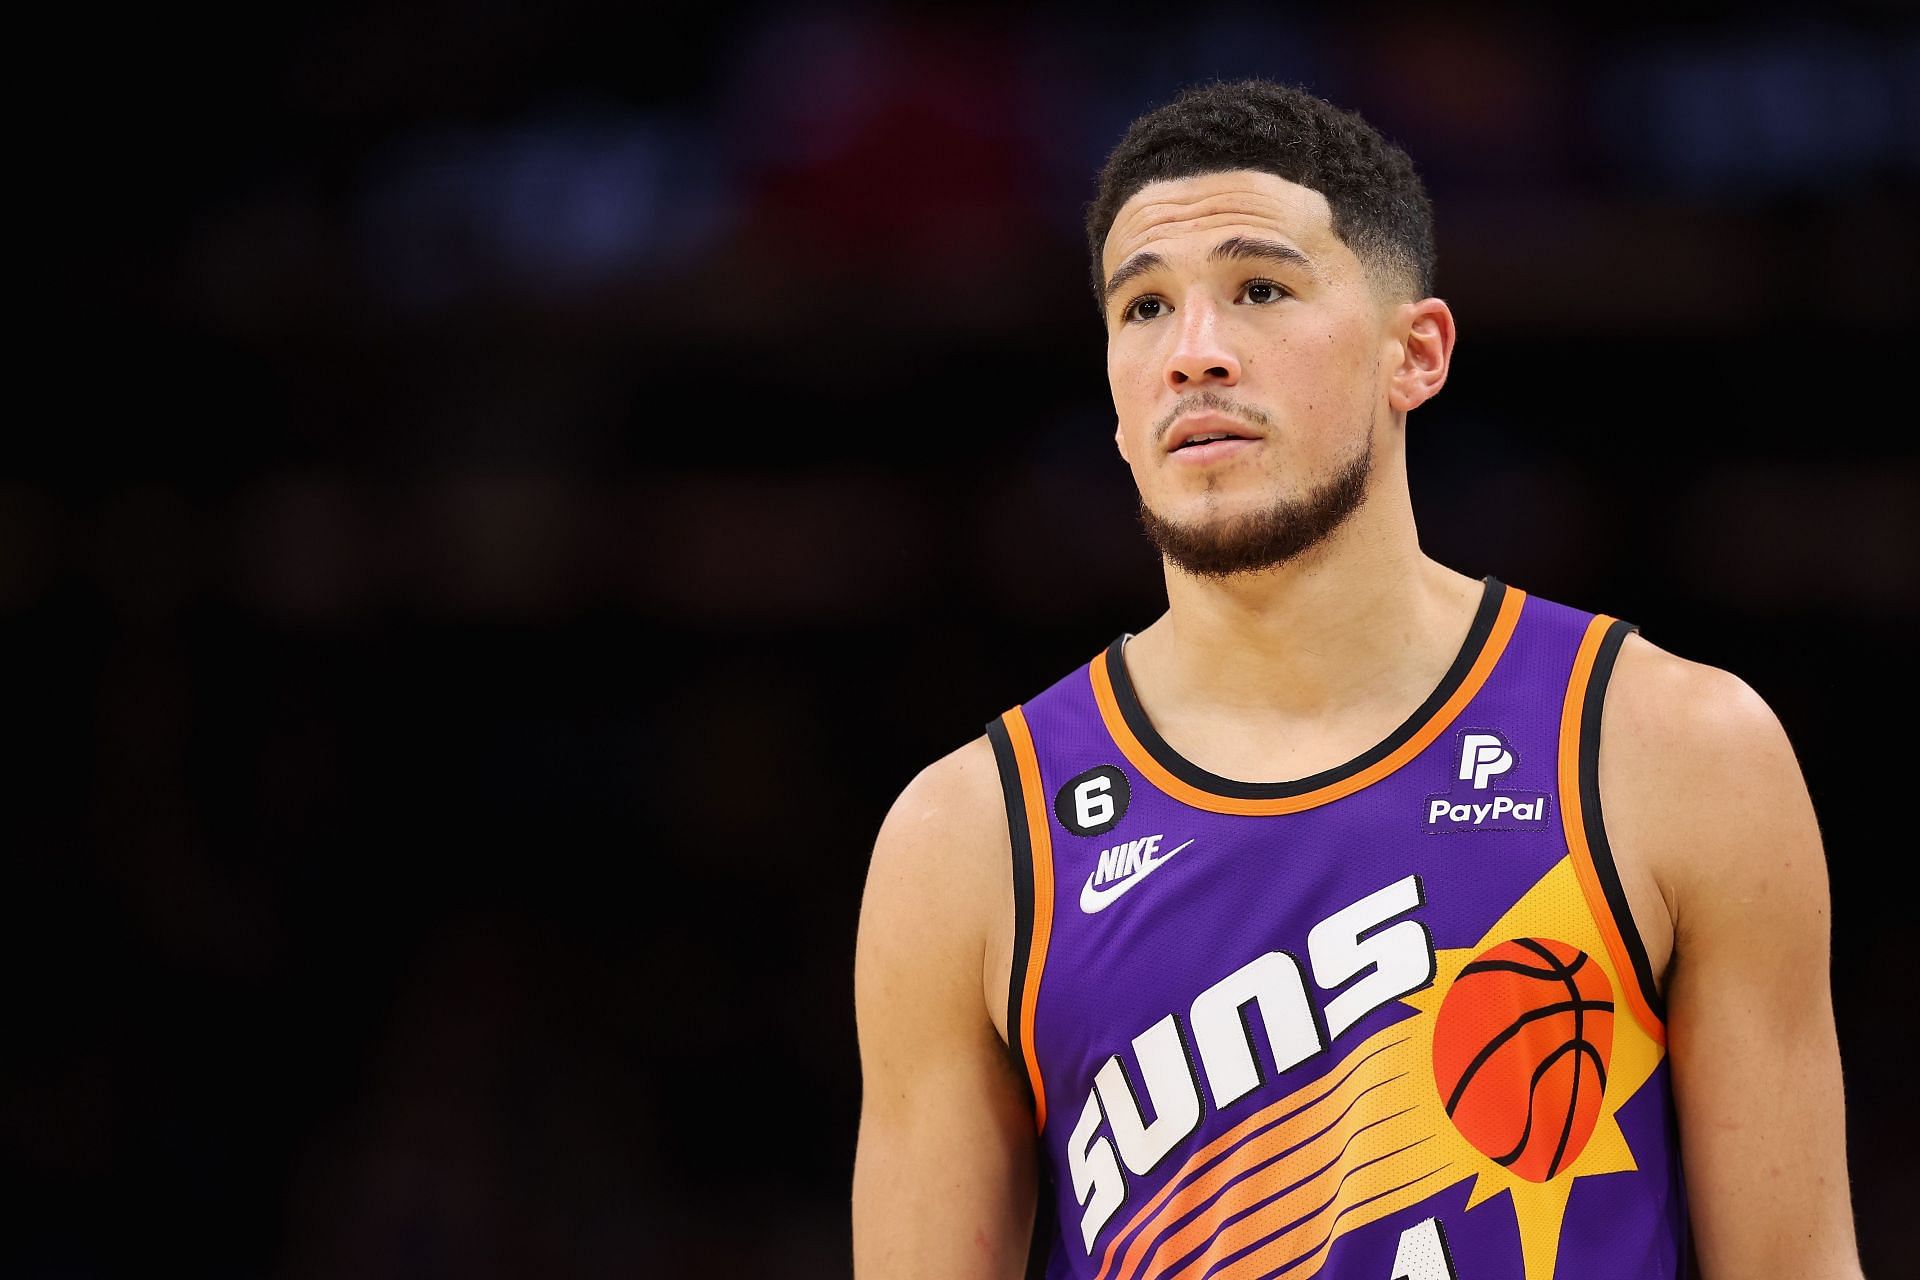 Devin Booker revealed Kobe Bryant had a huge impact on how he approaches the game